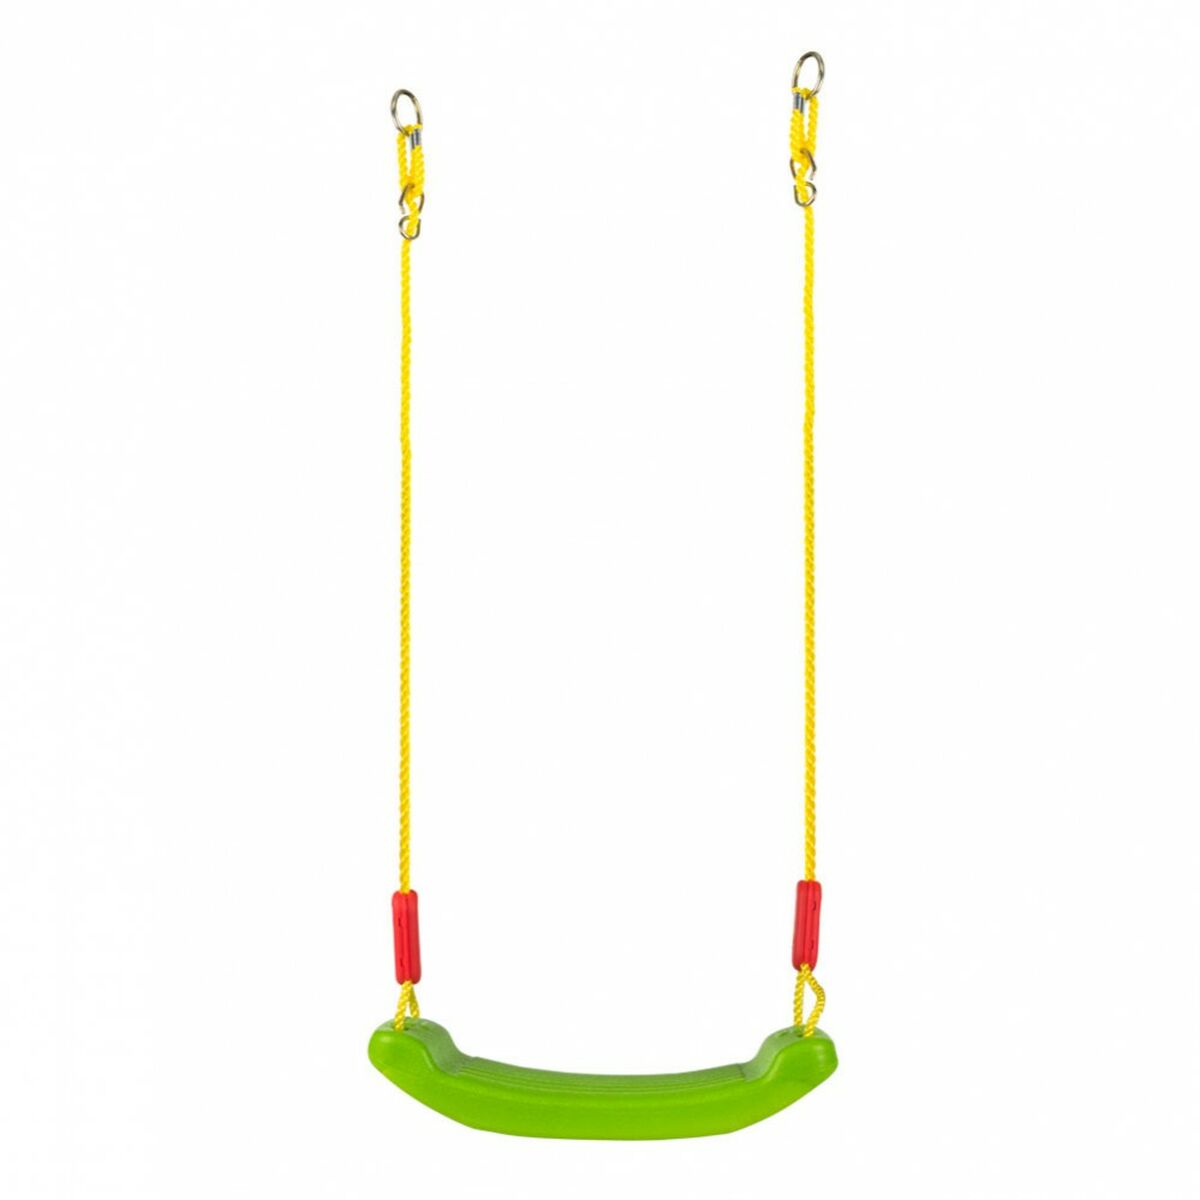 Swing seat Colorbaby 43 x 175 x 17 cm (4 Units)